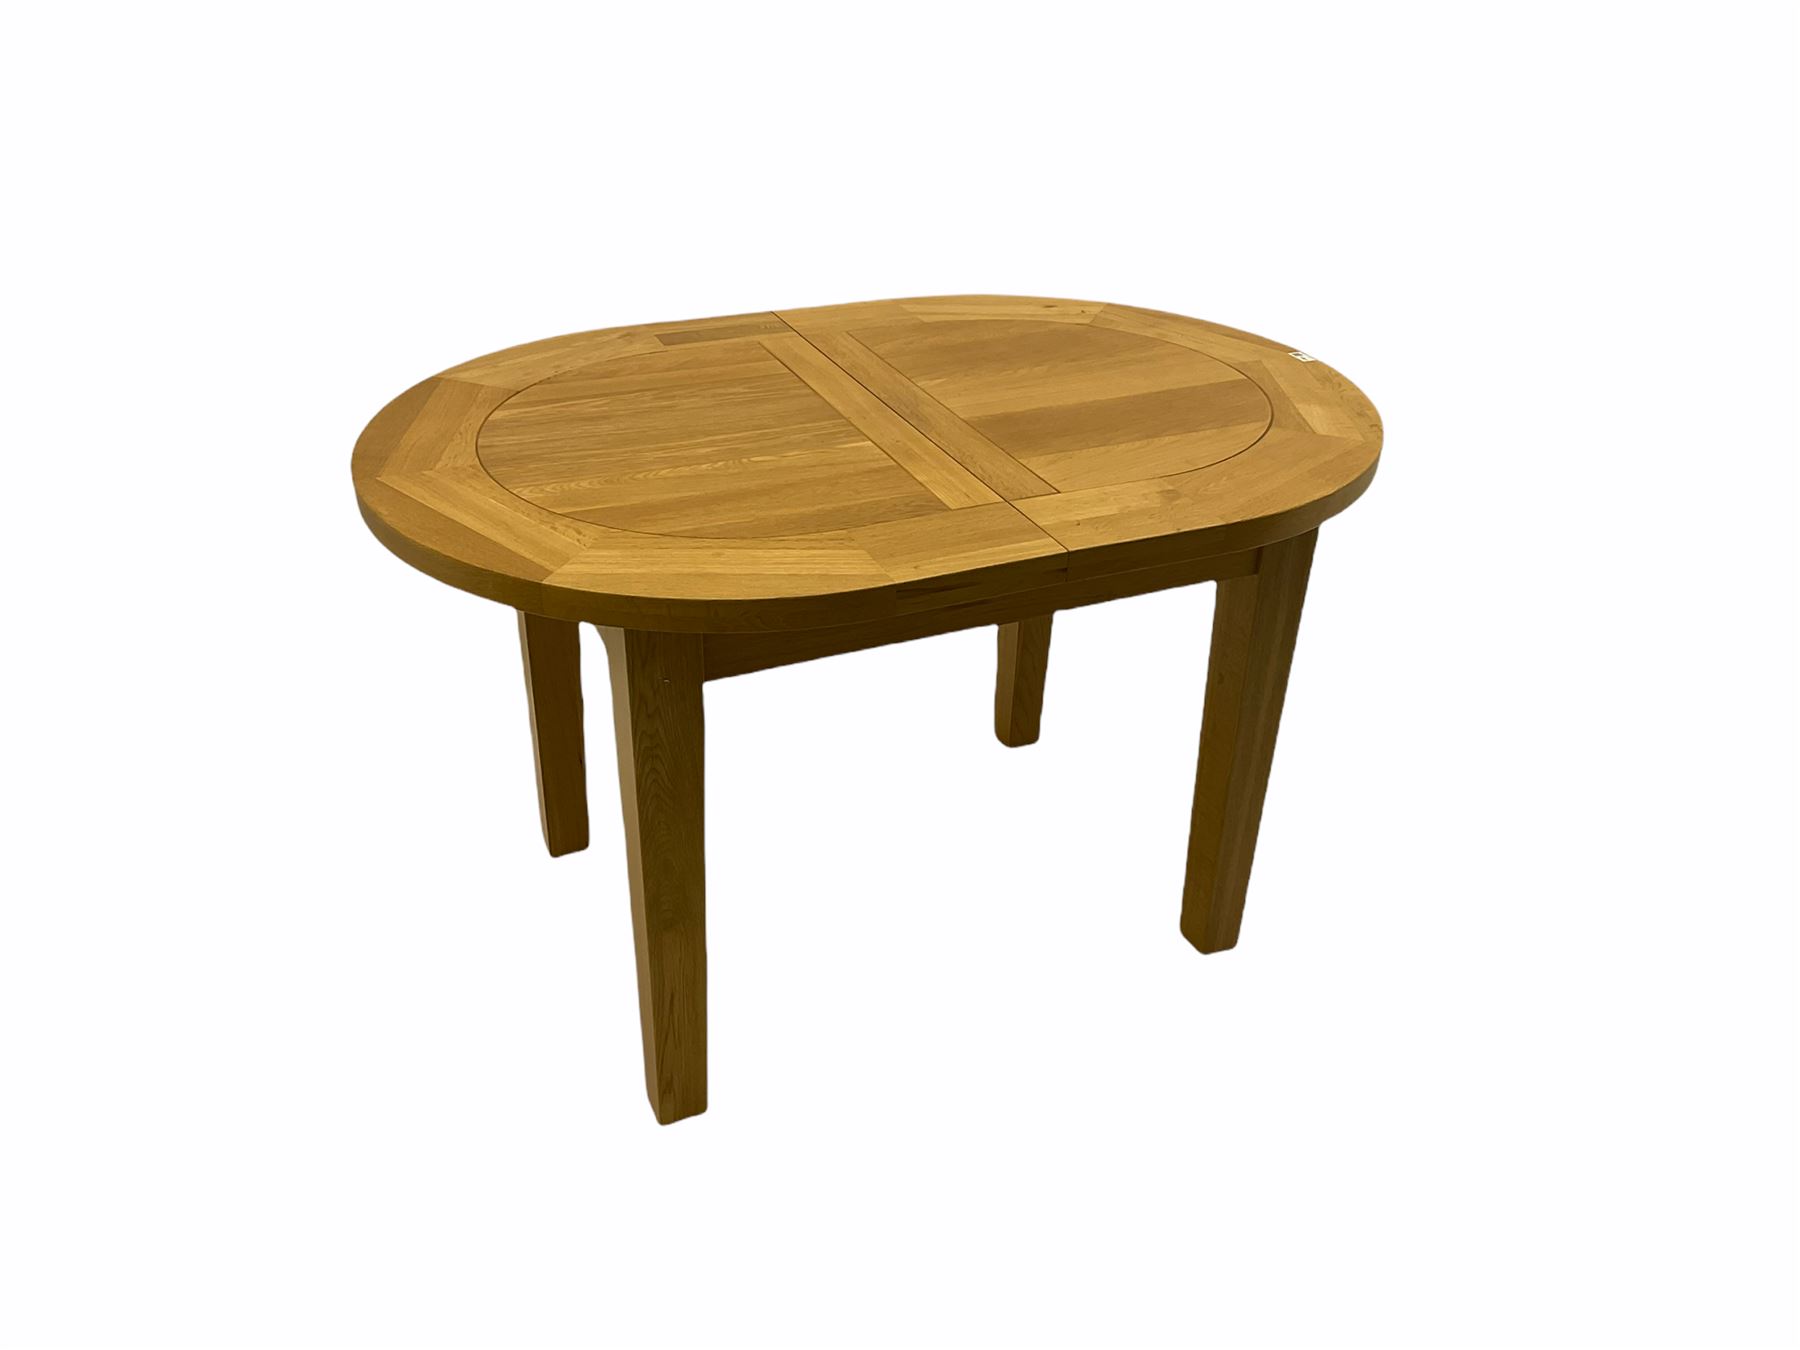 Solid oak oval extending dining table - Image 2 of 6